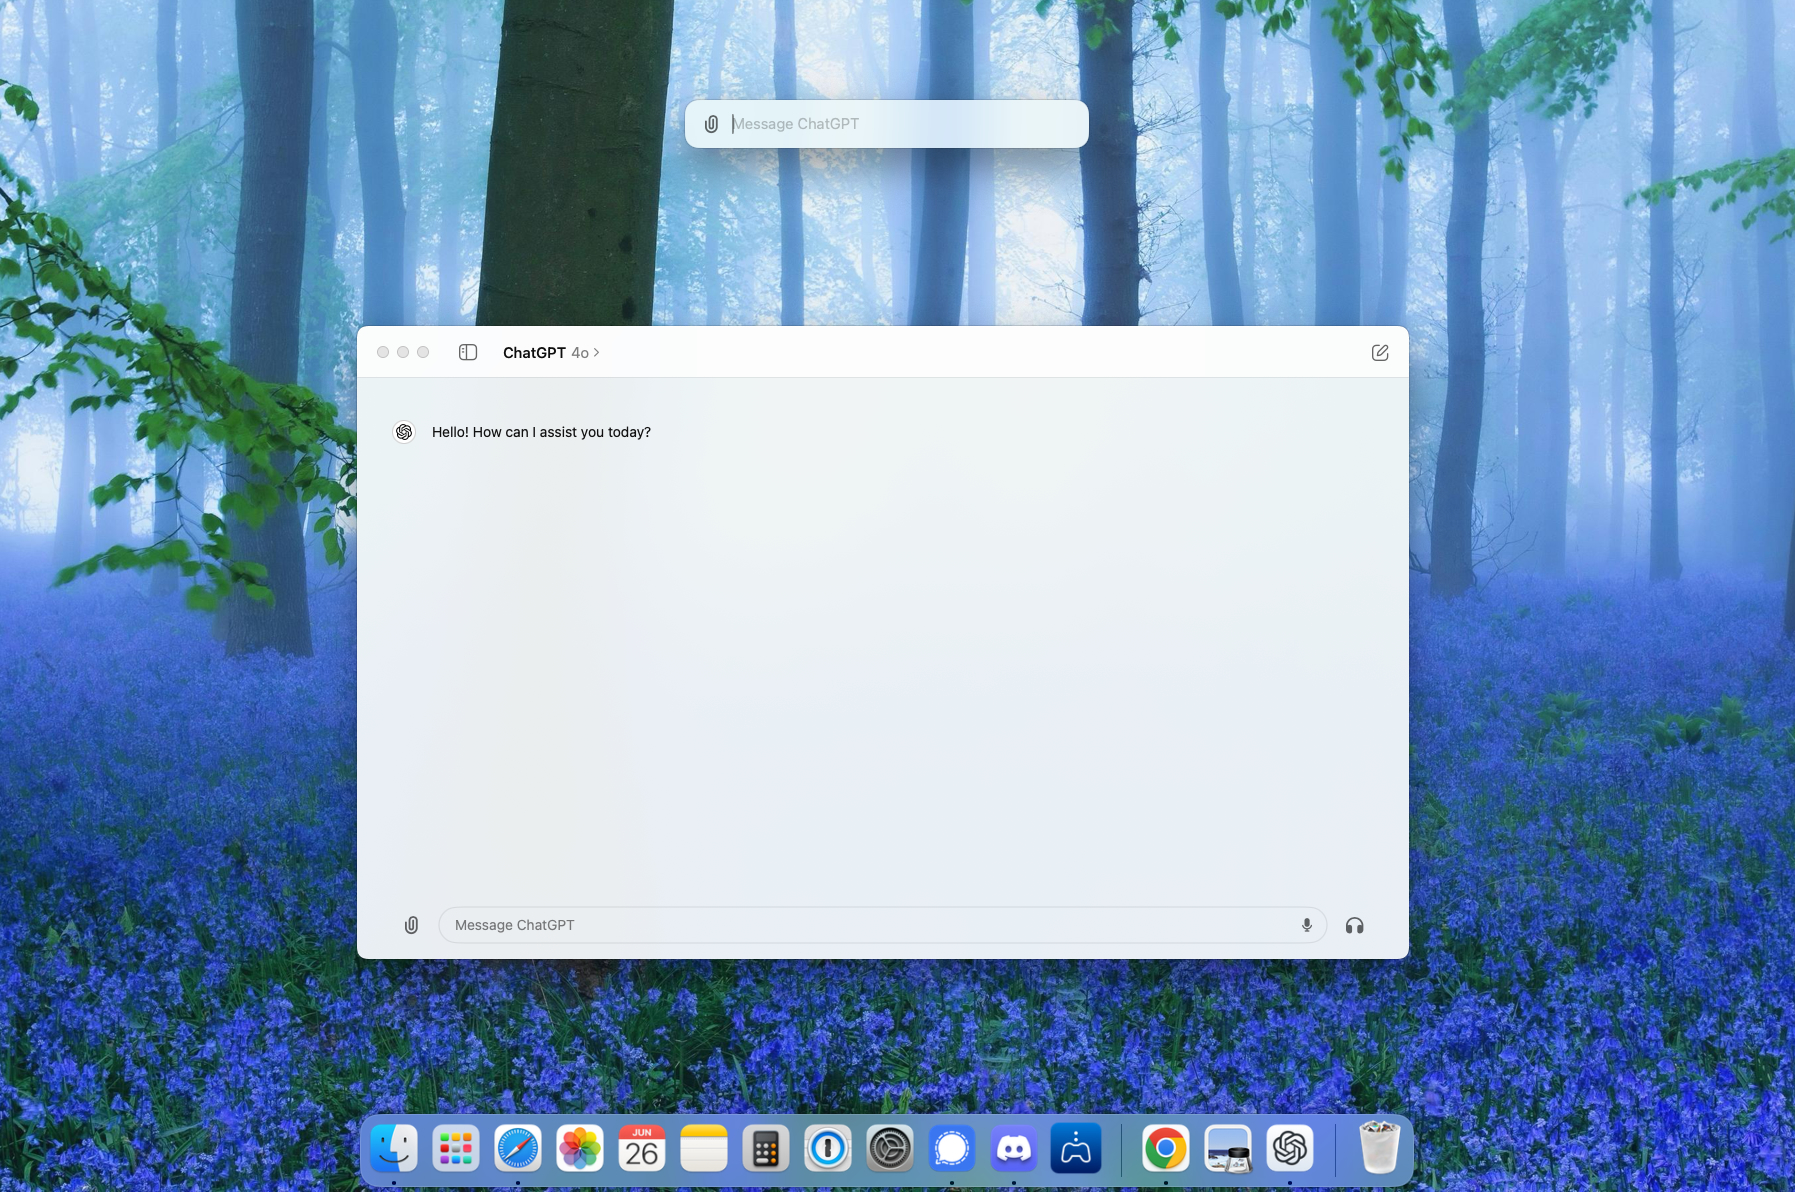 The macOS ChatGPT app with shortcut bar and dock showing.